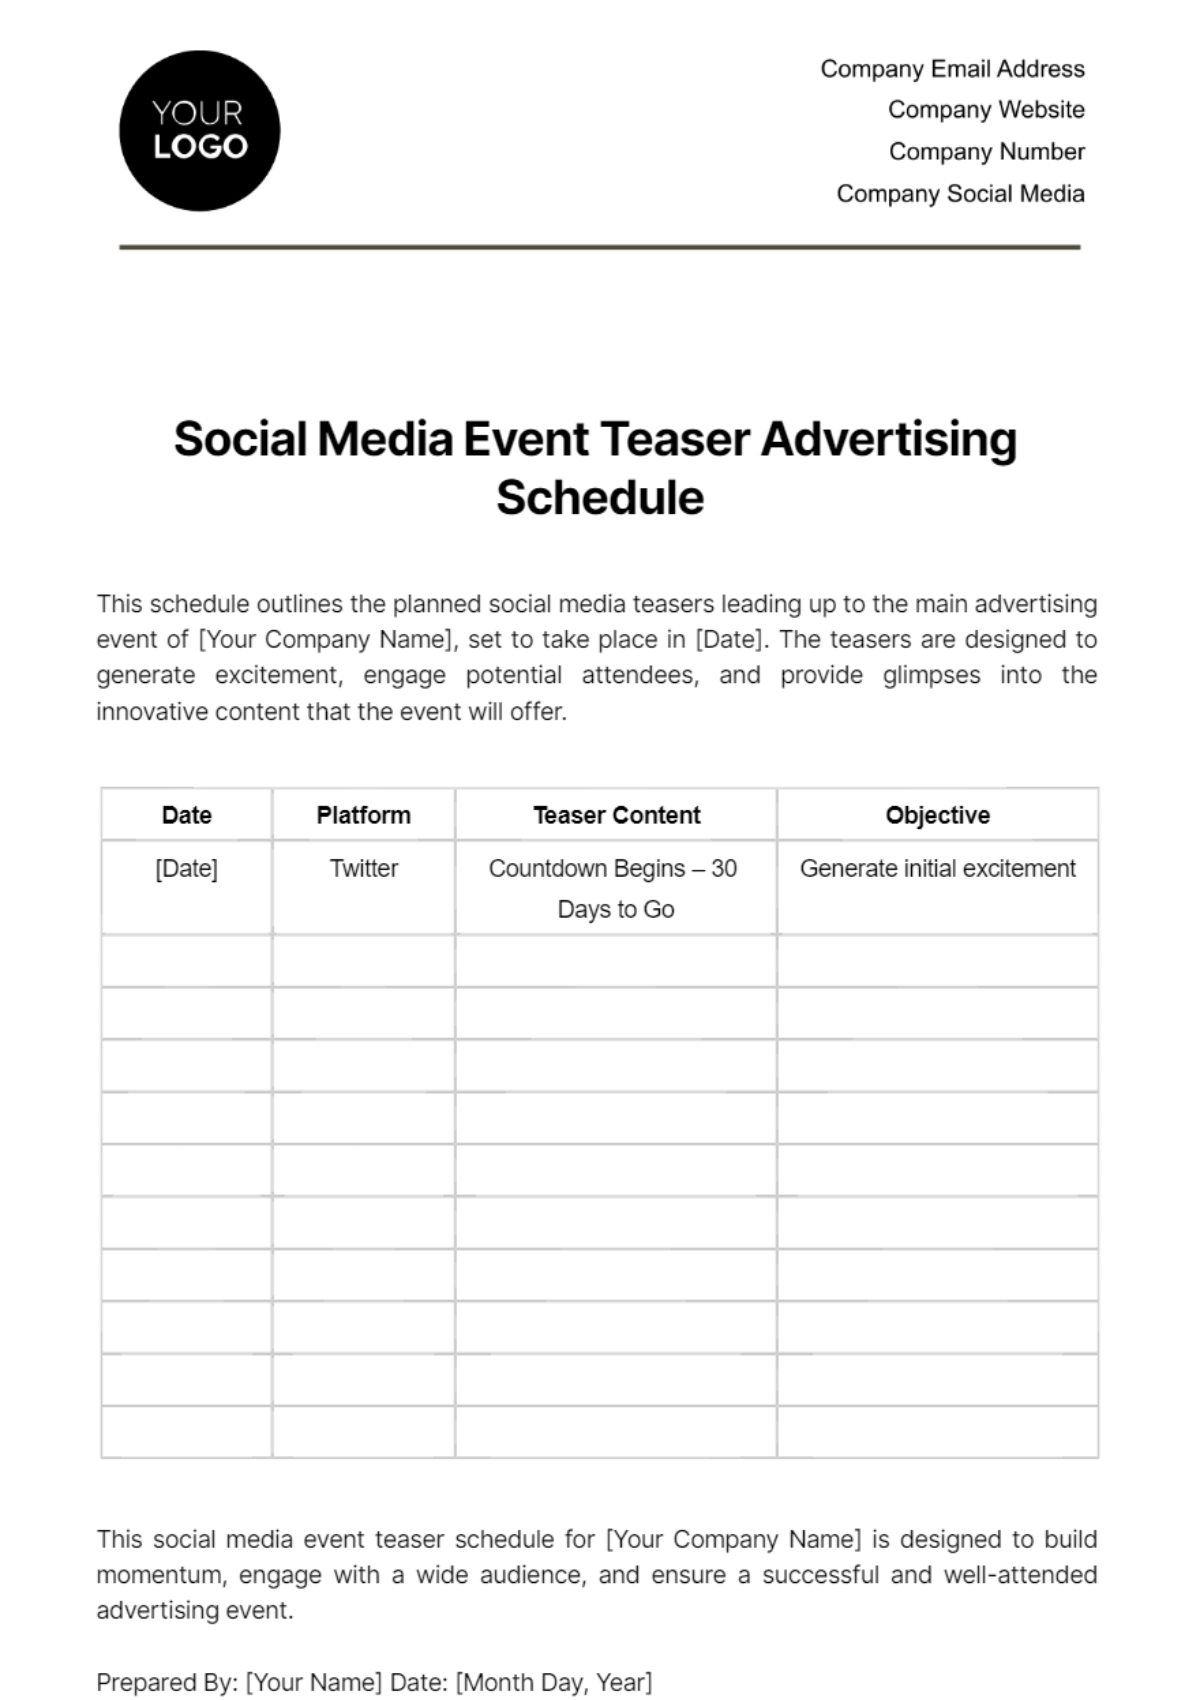 Social Media Event Teaser Advertising Schedule Template